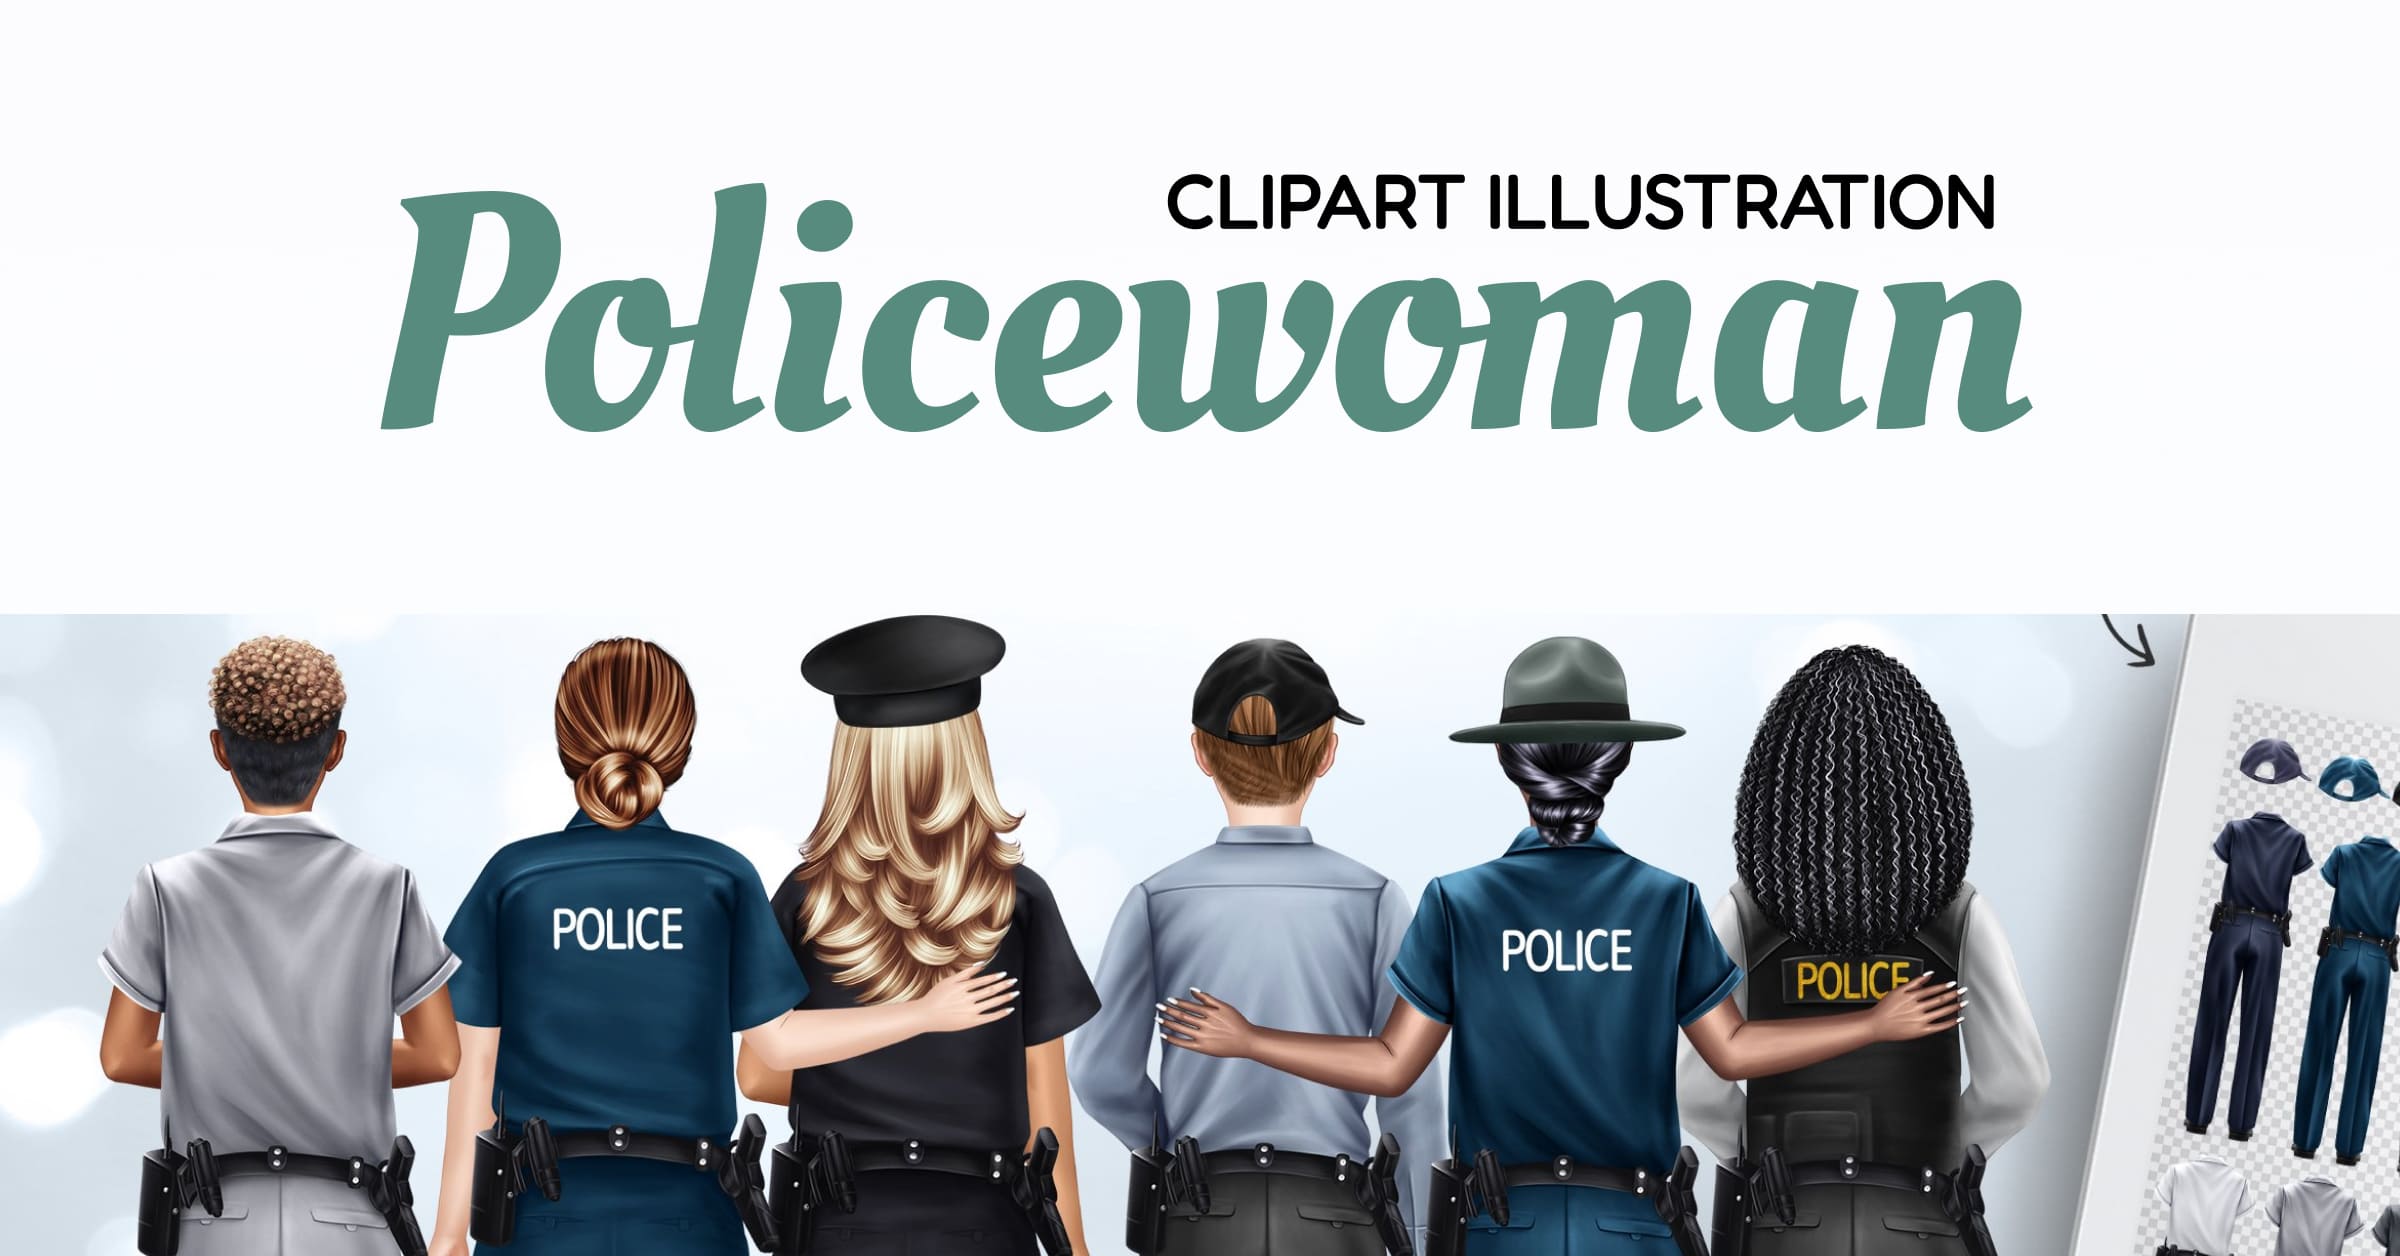 Policewoman Clip Art, Police Officers Clipart, Police PNG - Facebook.